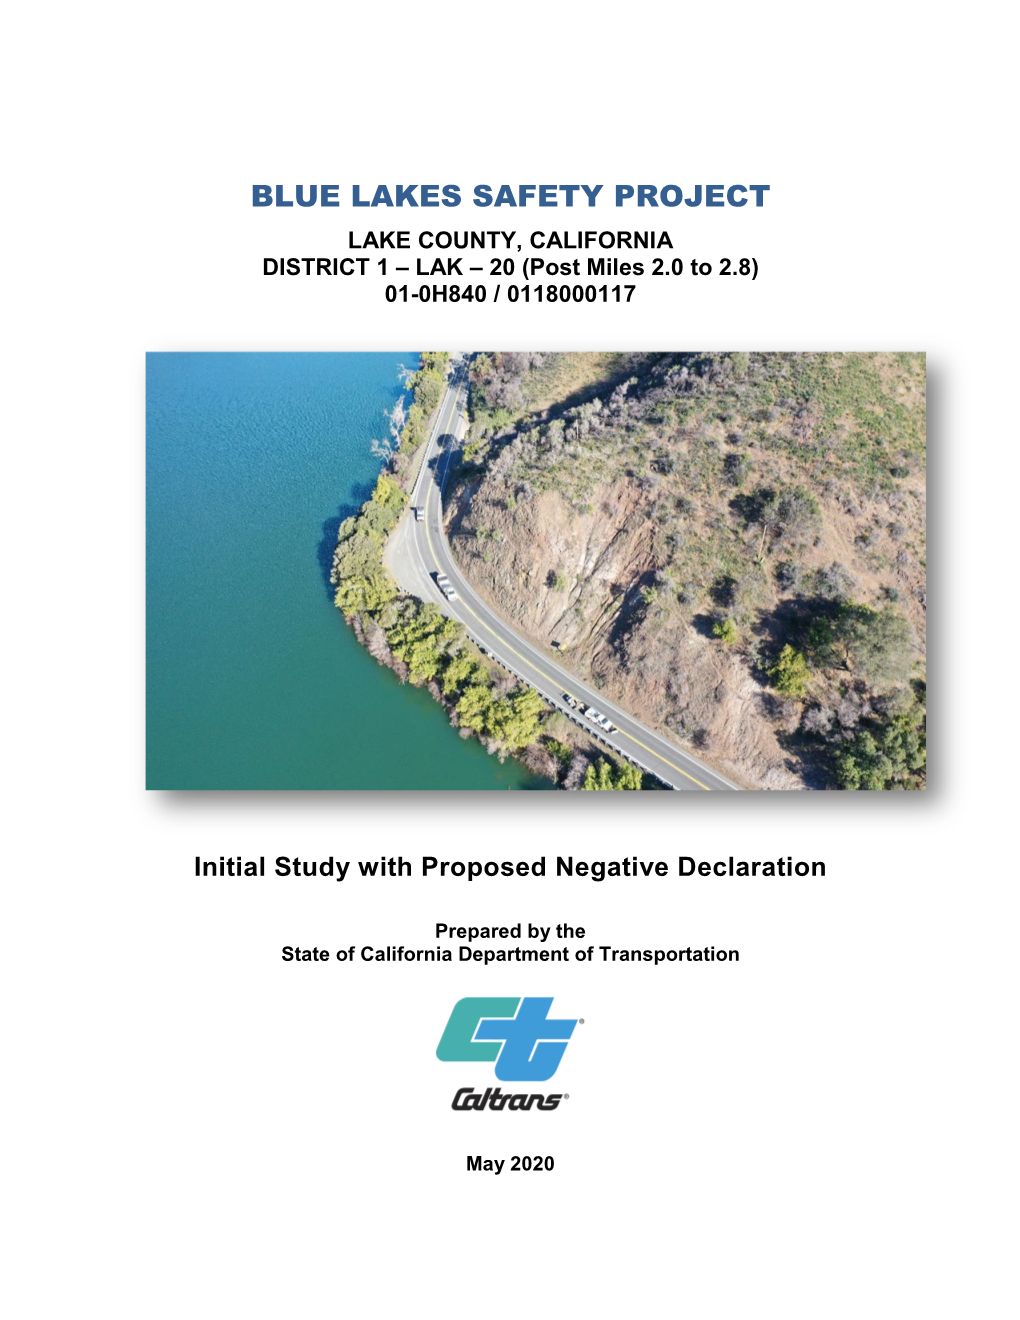 BLUE LAKES SAFETY PROJECT LAKE COUNTY, CALIFORNIA DISTRICT 1 – LAK – 20 (Post Miles 2.0 to 2.8) 01-0H840 / 0118000117